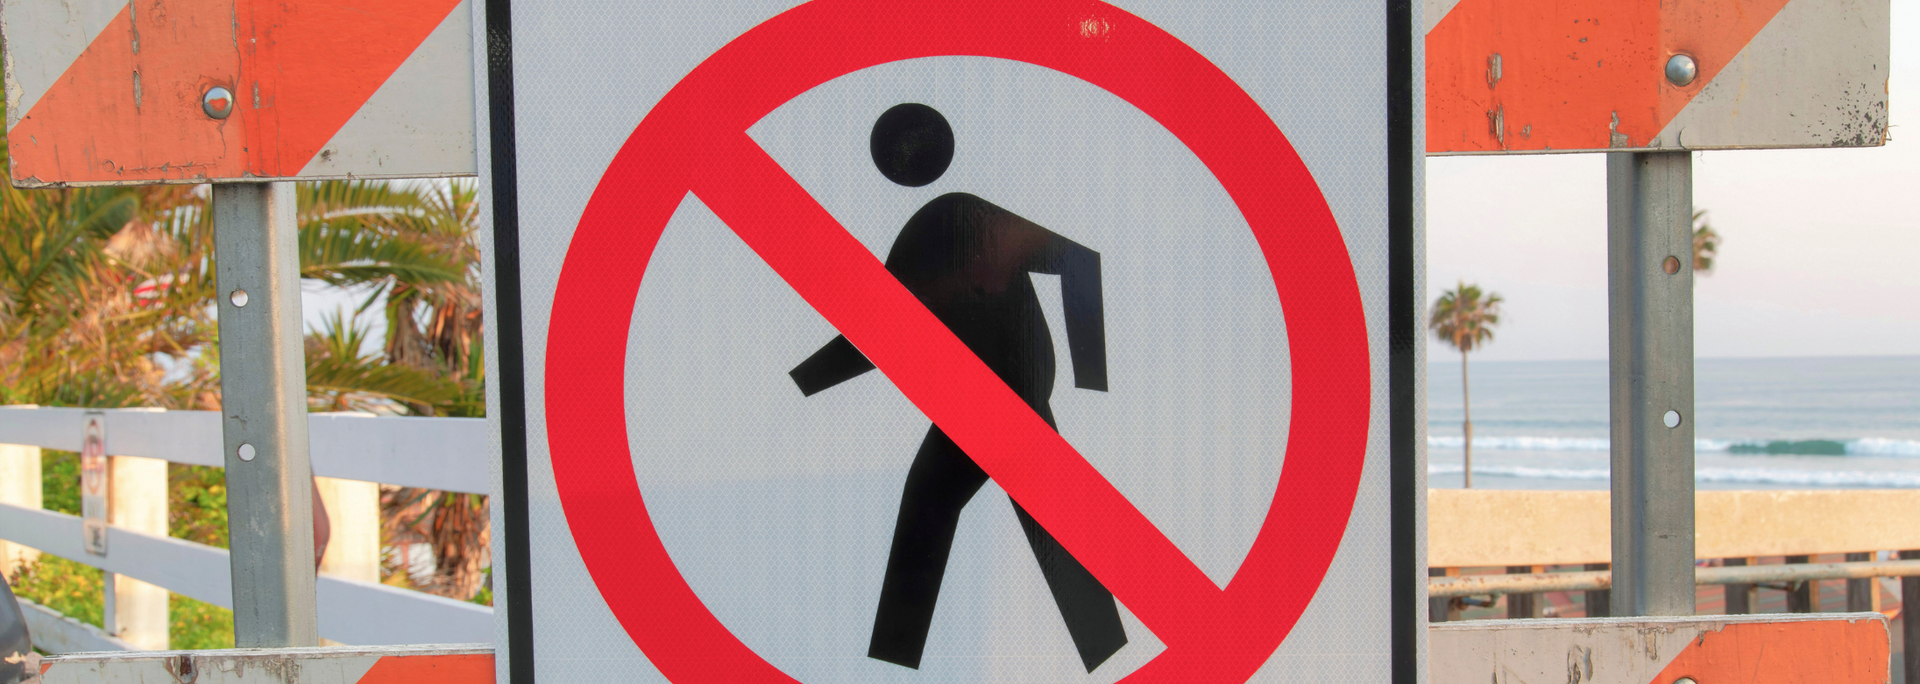 Picture of a sign depicting Jaywalking